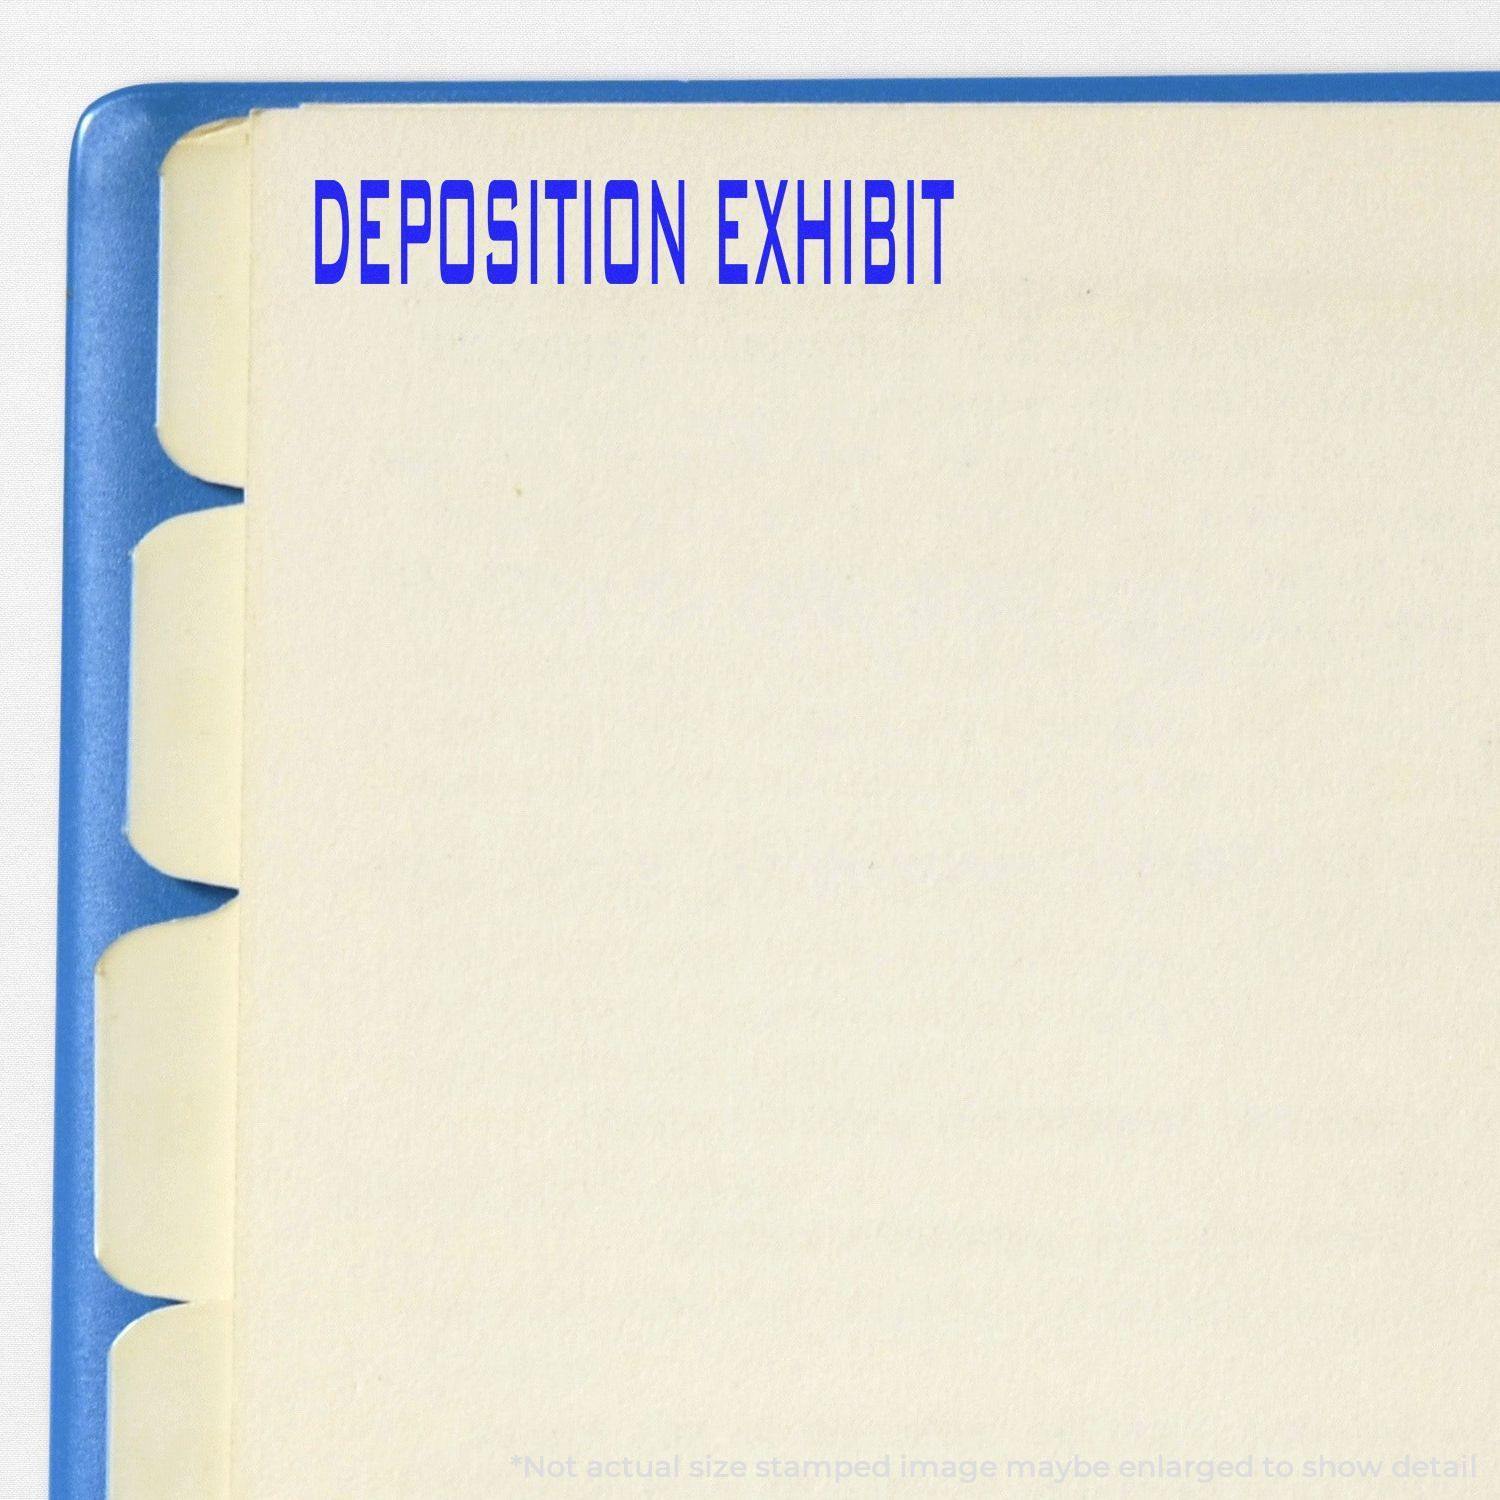 A stock office pre-inked stamp with a stamped image showing how the text "DEPOSITION EXHIBIT" is displayed after stamping.